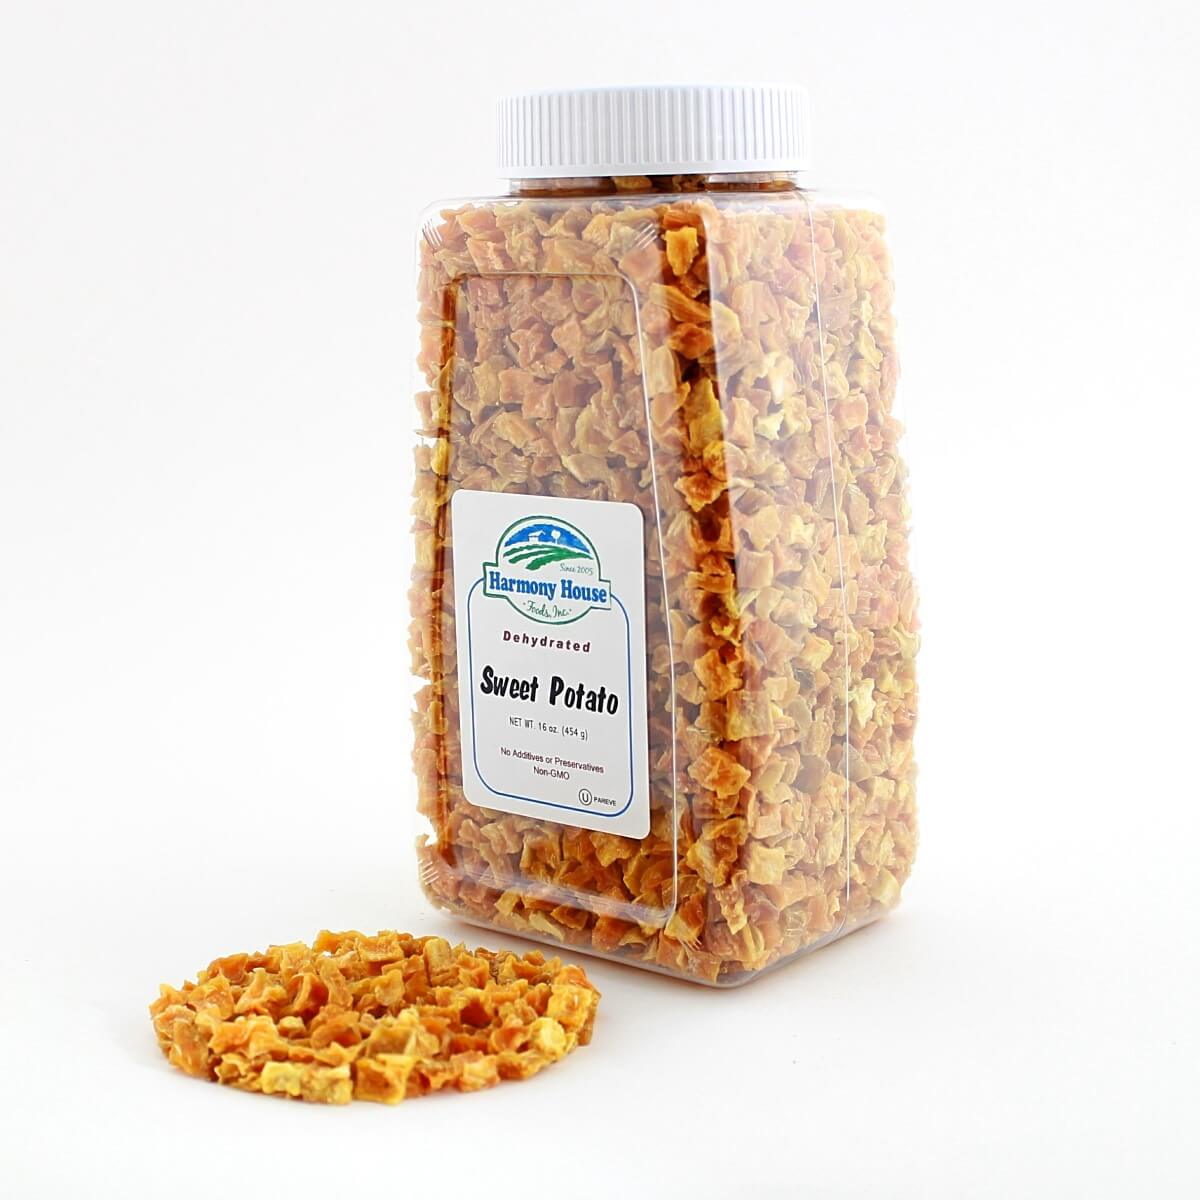 A Jar of Granola with a Lid Next to it (SHIPS IN 1-2 WEEKS).